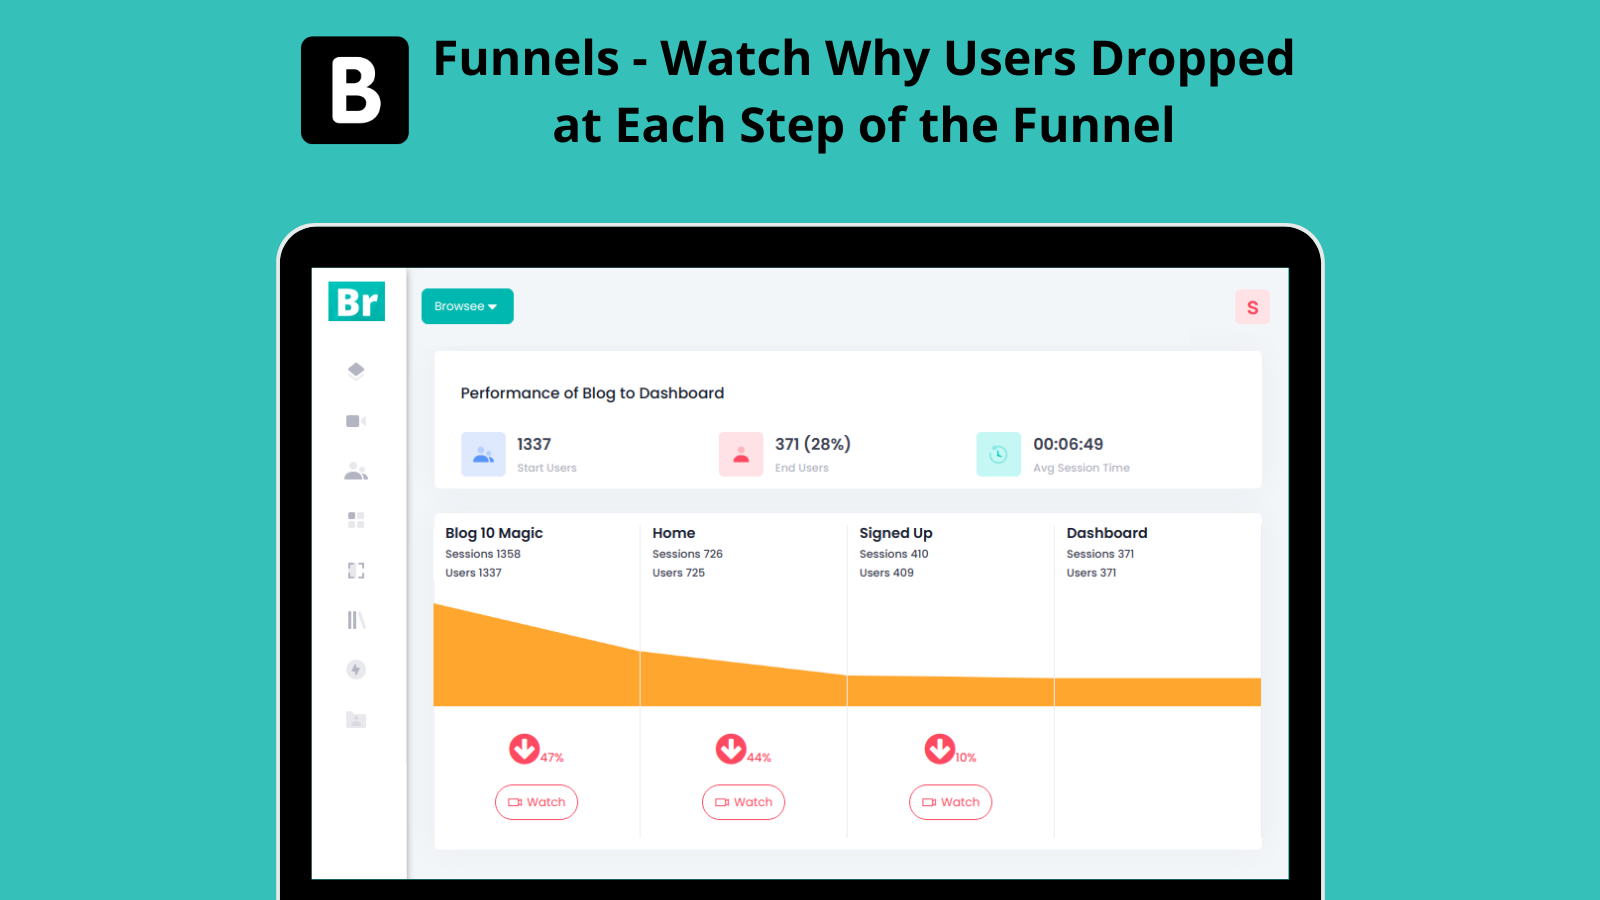 Funnels - Watch Why Users Dropped at Each Step of the Funnel